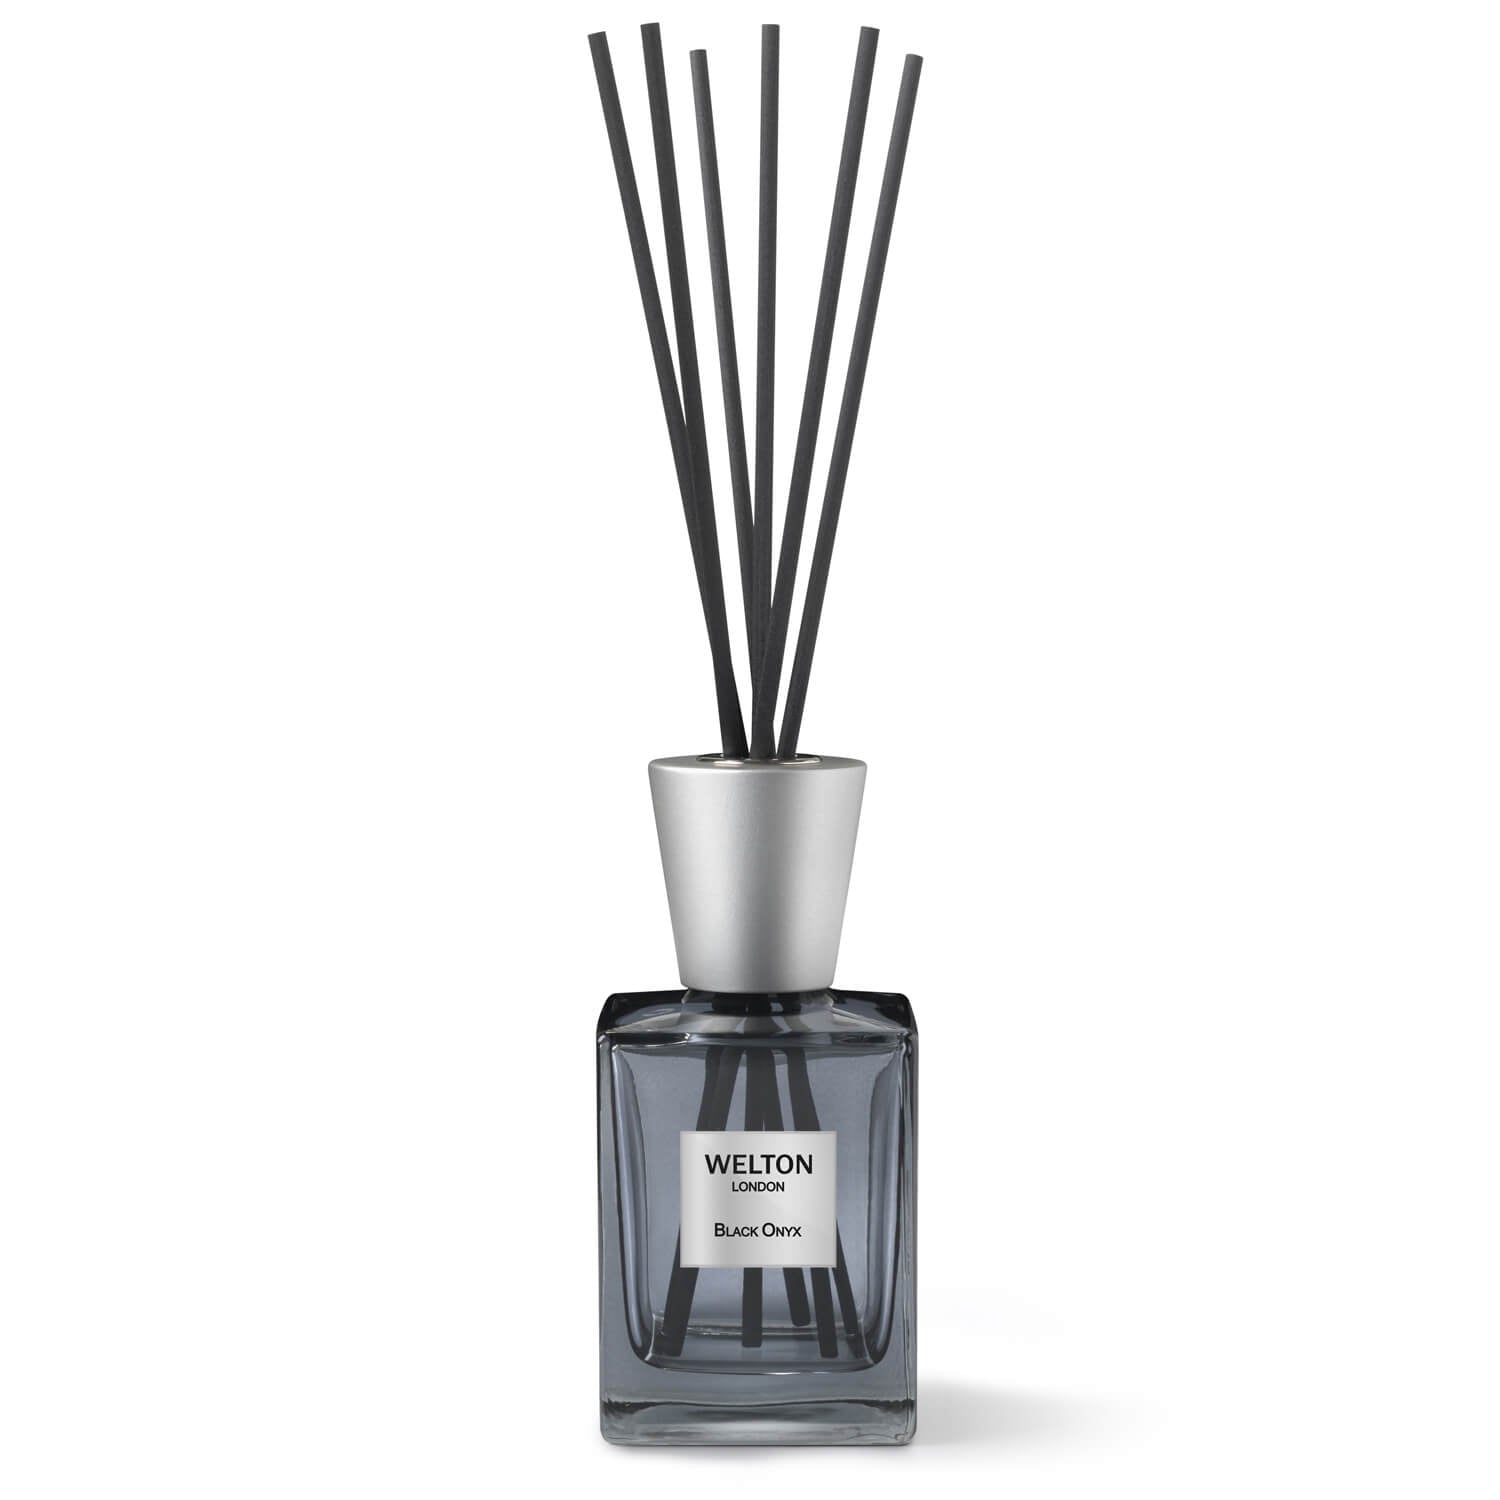 welton london diffuser black onyx 500 ml
citrus - woody - spicy diffusers 